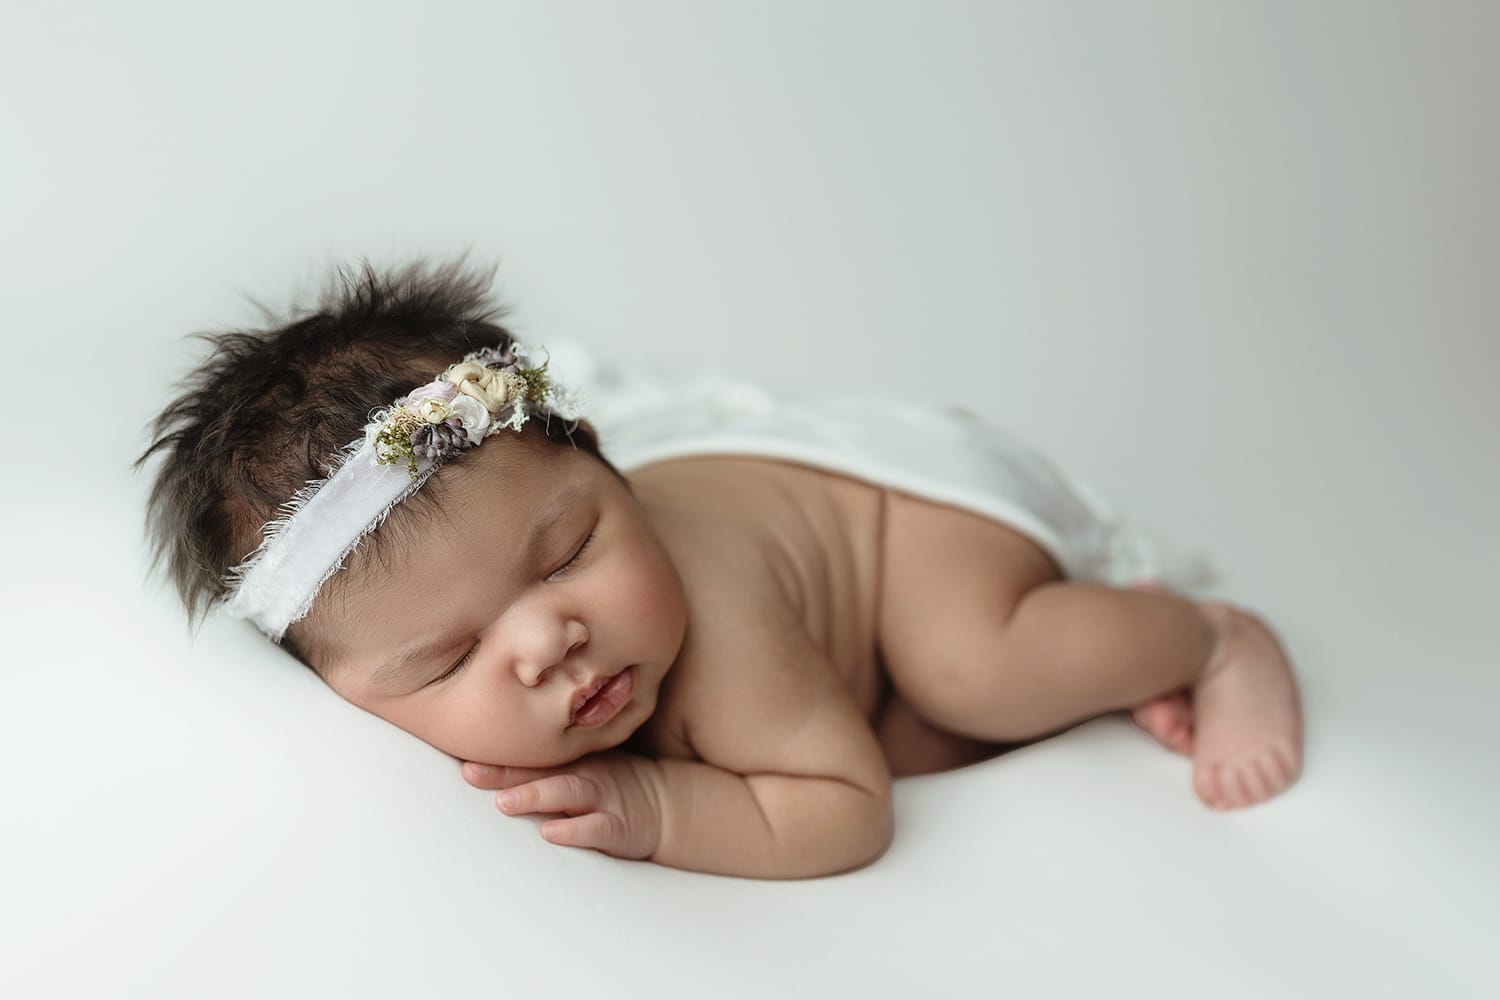 Newborn baby girl with white floral headband lying on her tummy with hand under cheek with Baton Rouge doula.